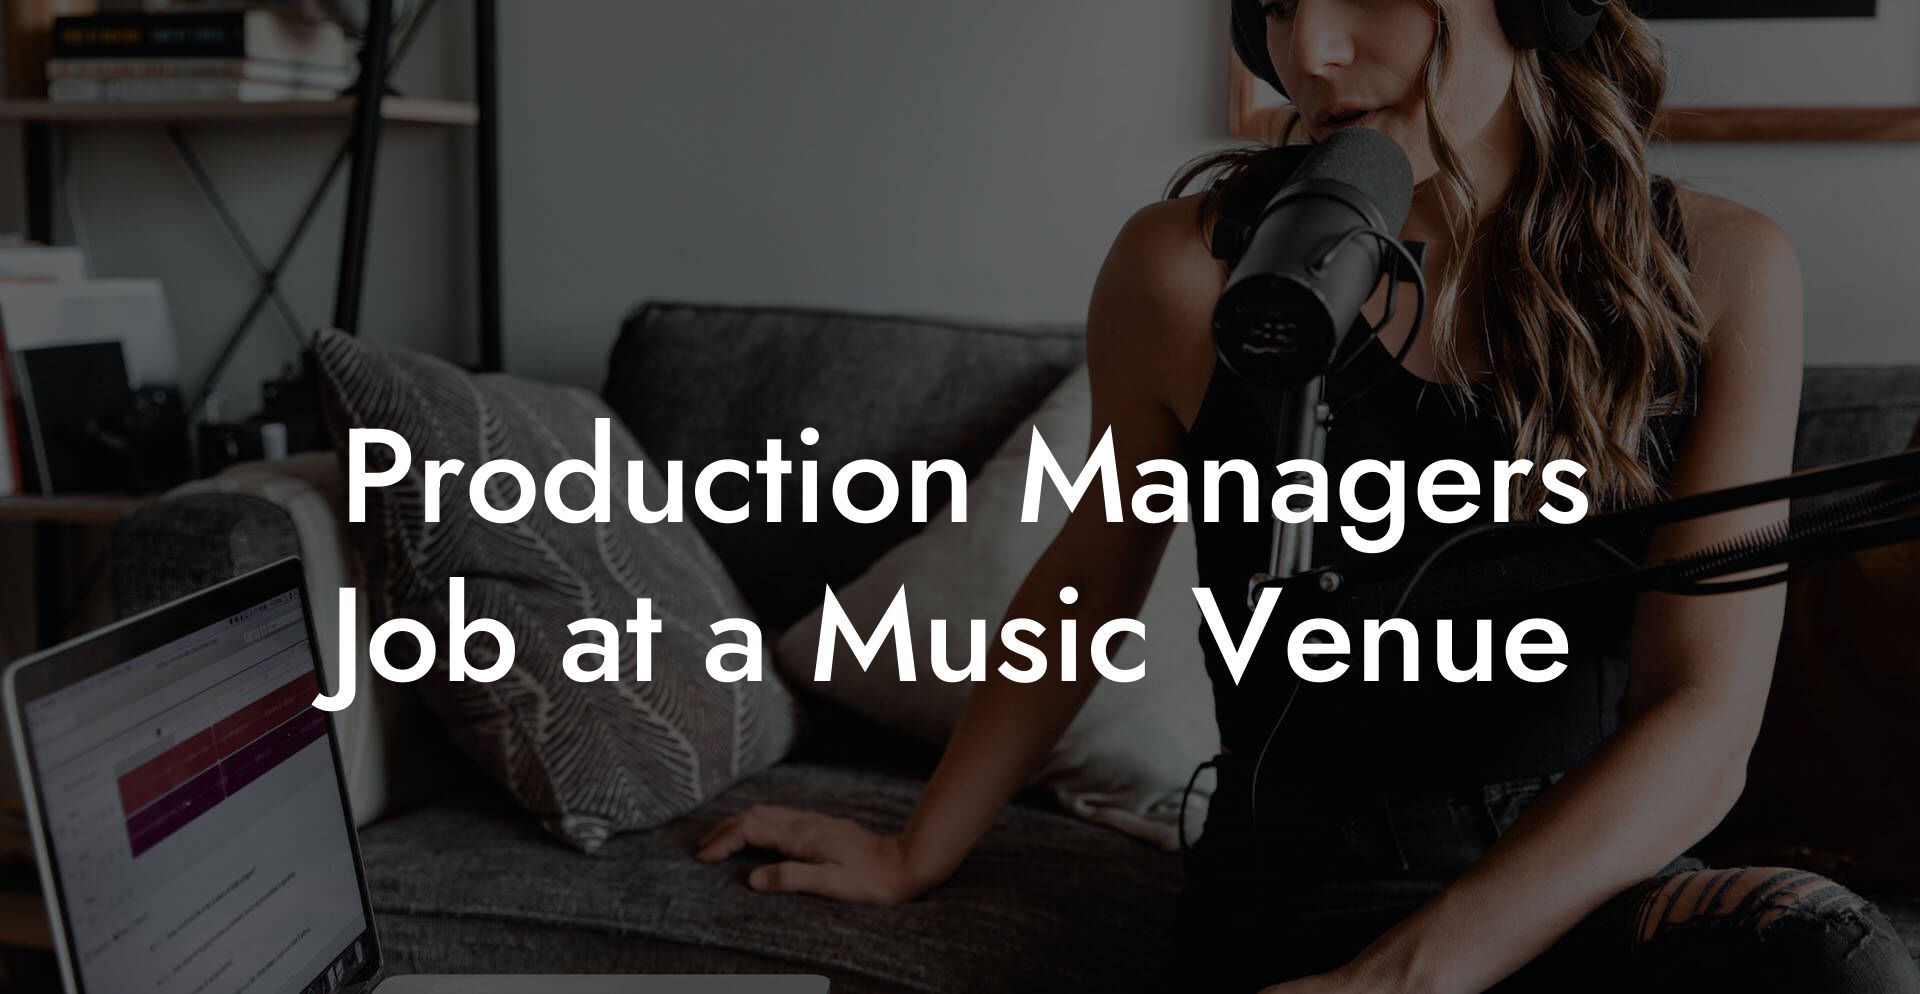 Production Managers Job at a Music Venue